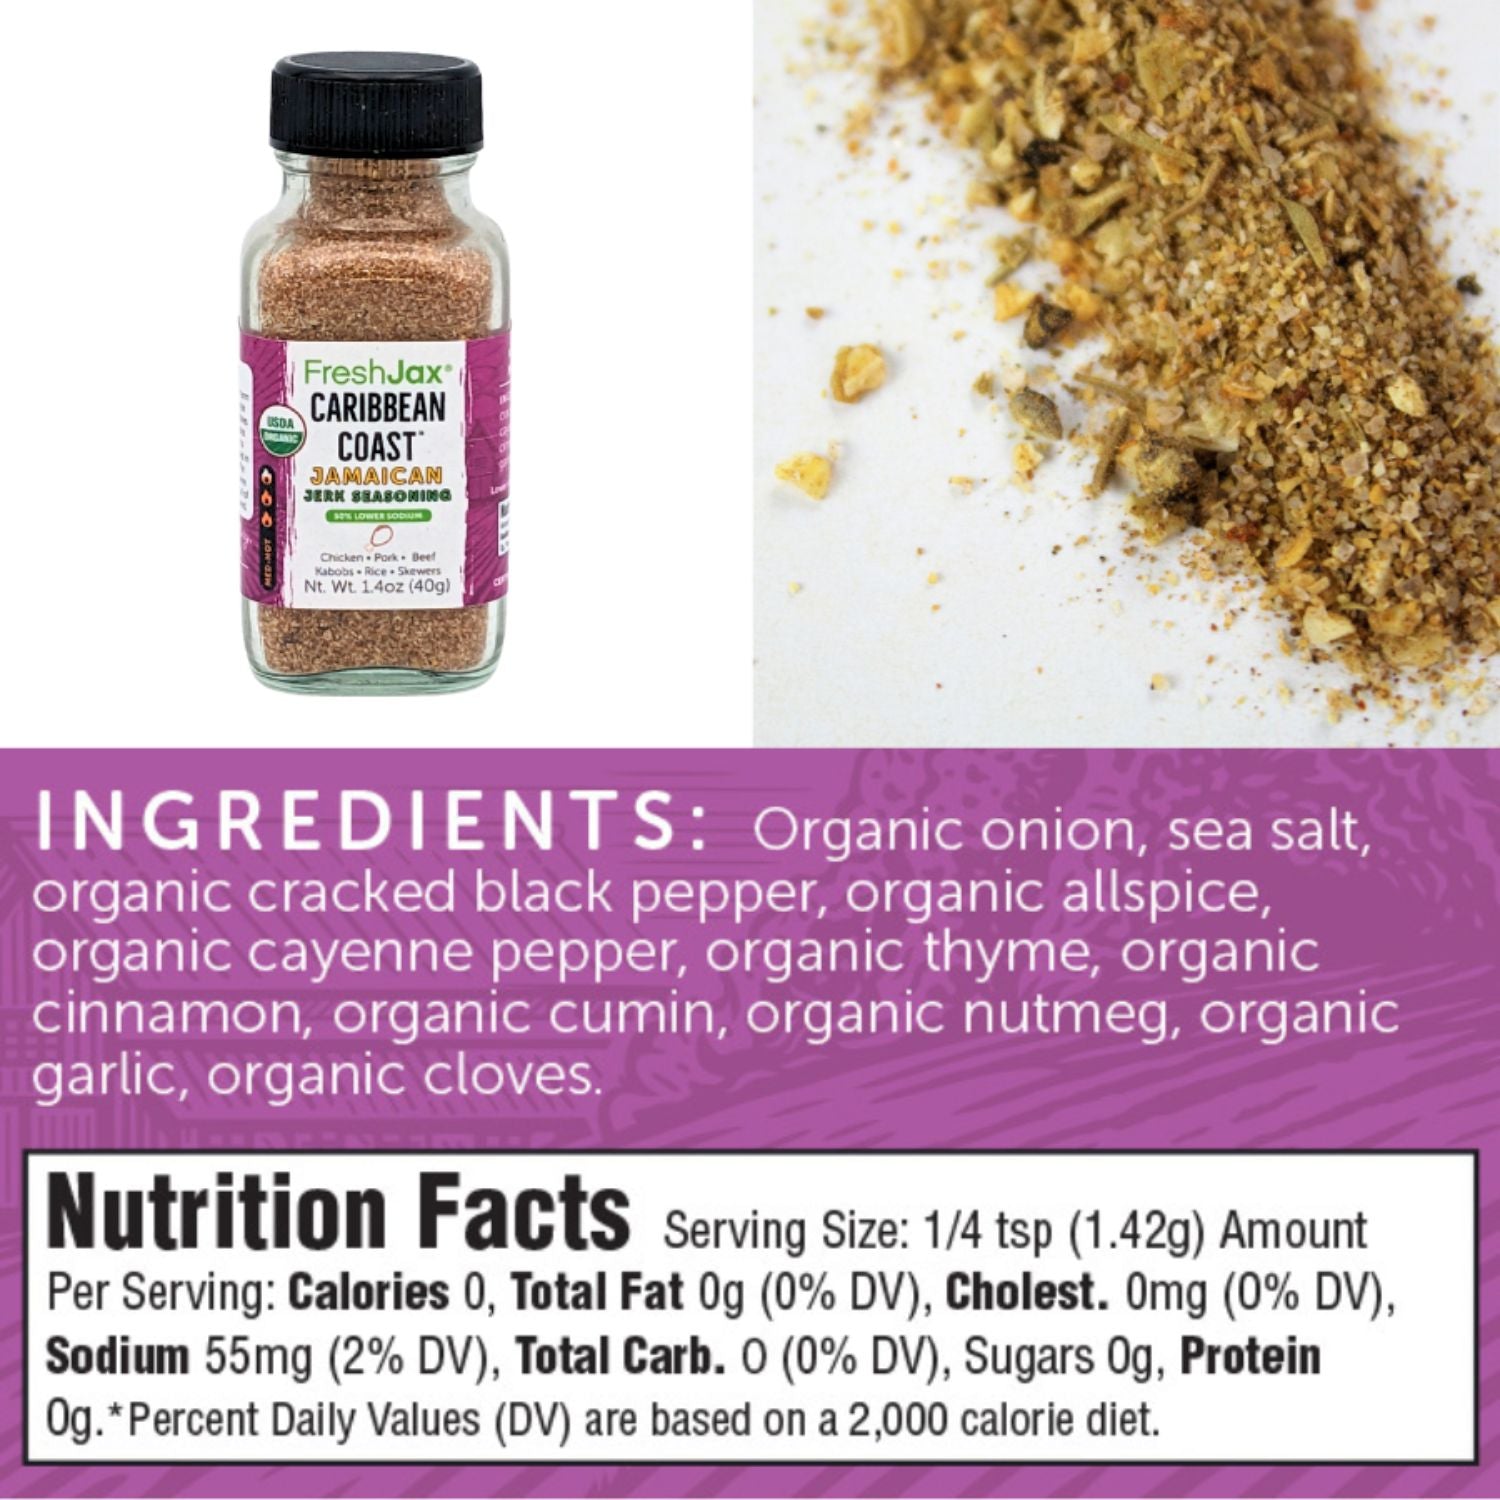 FreshJax Organic Spices Caribbean Coast Ingredients and Nutritional Information